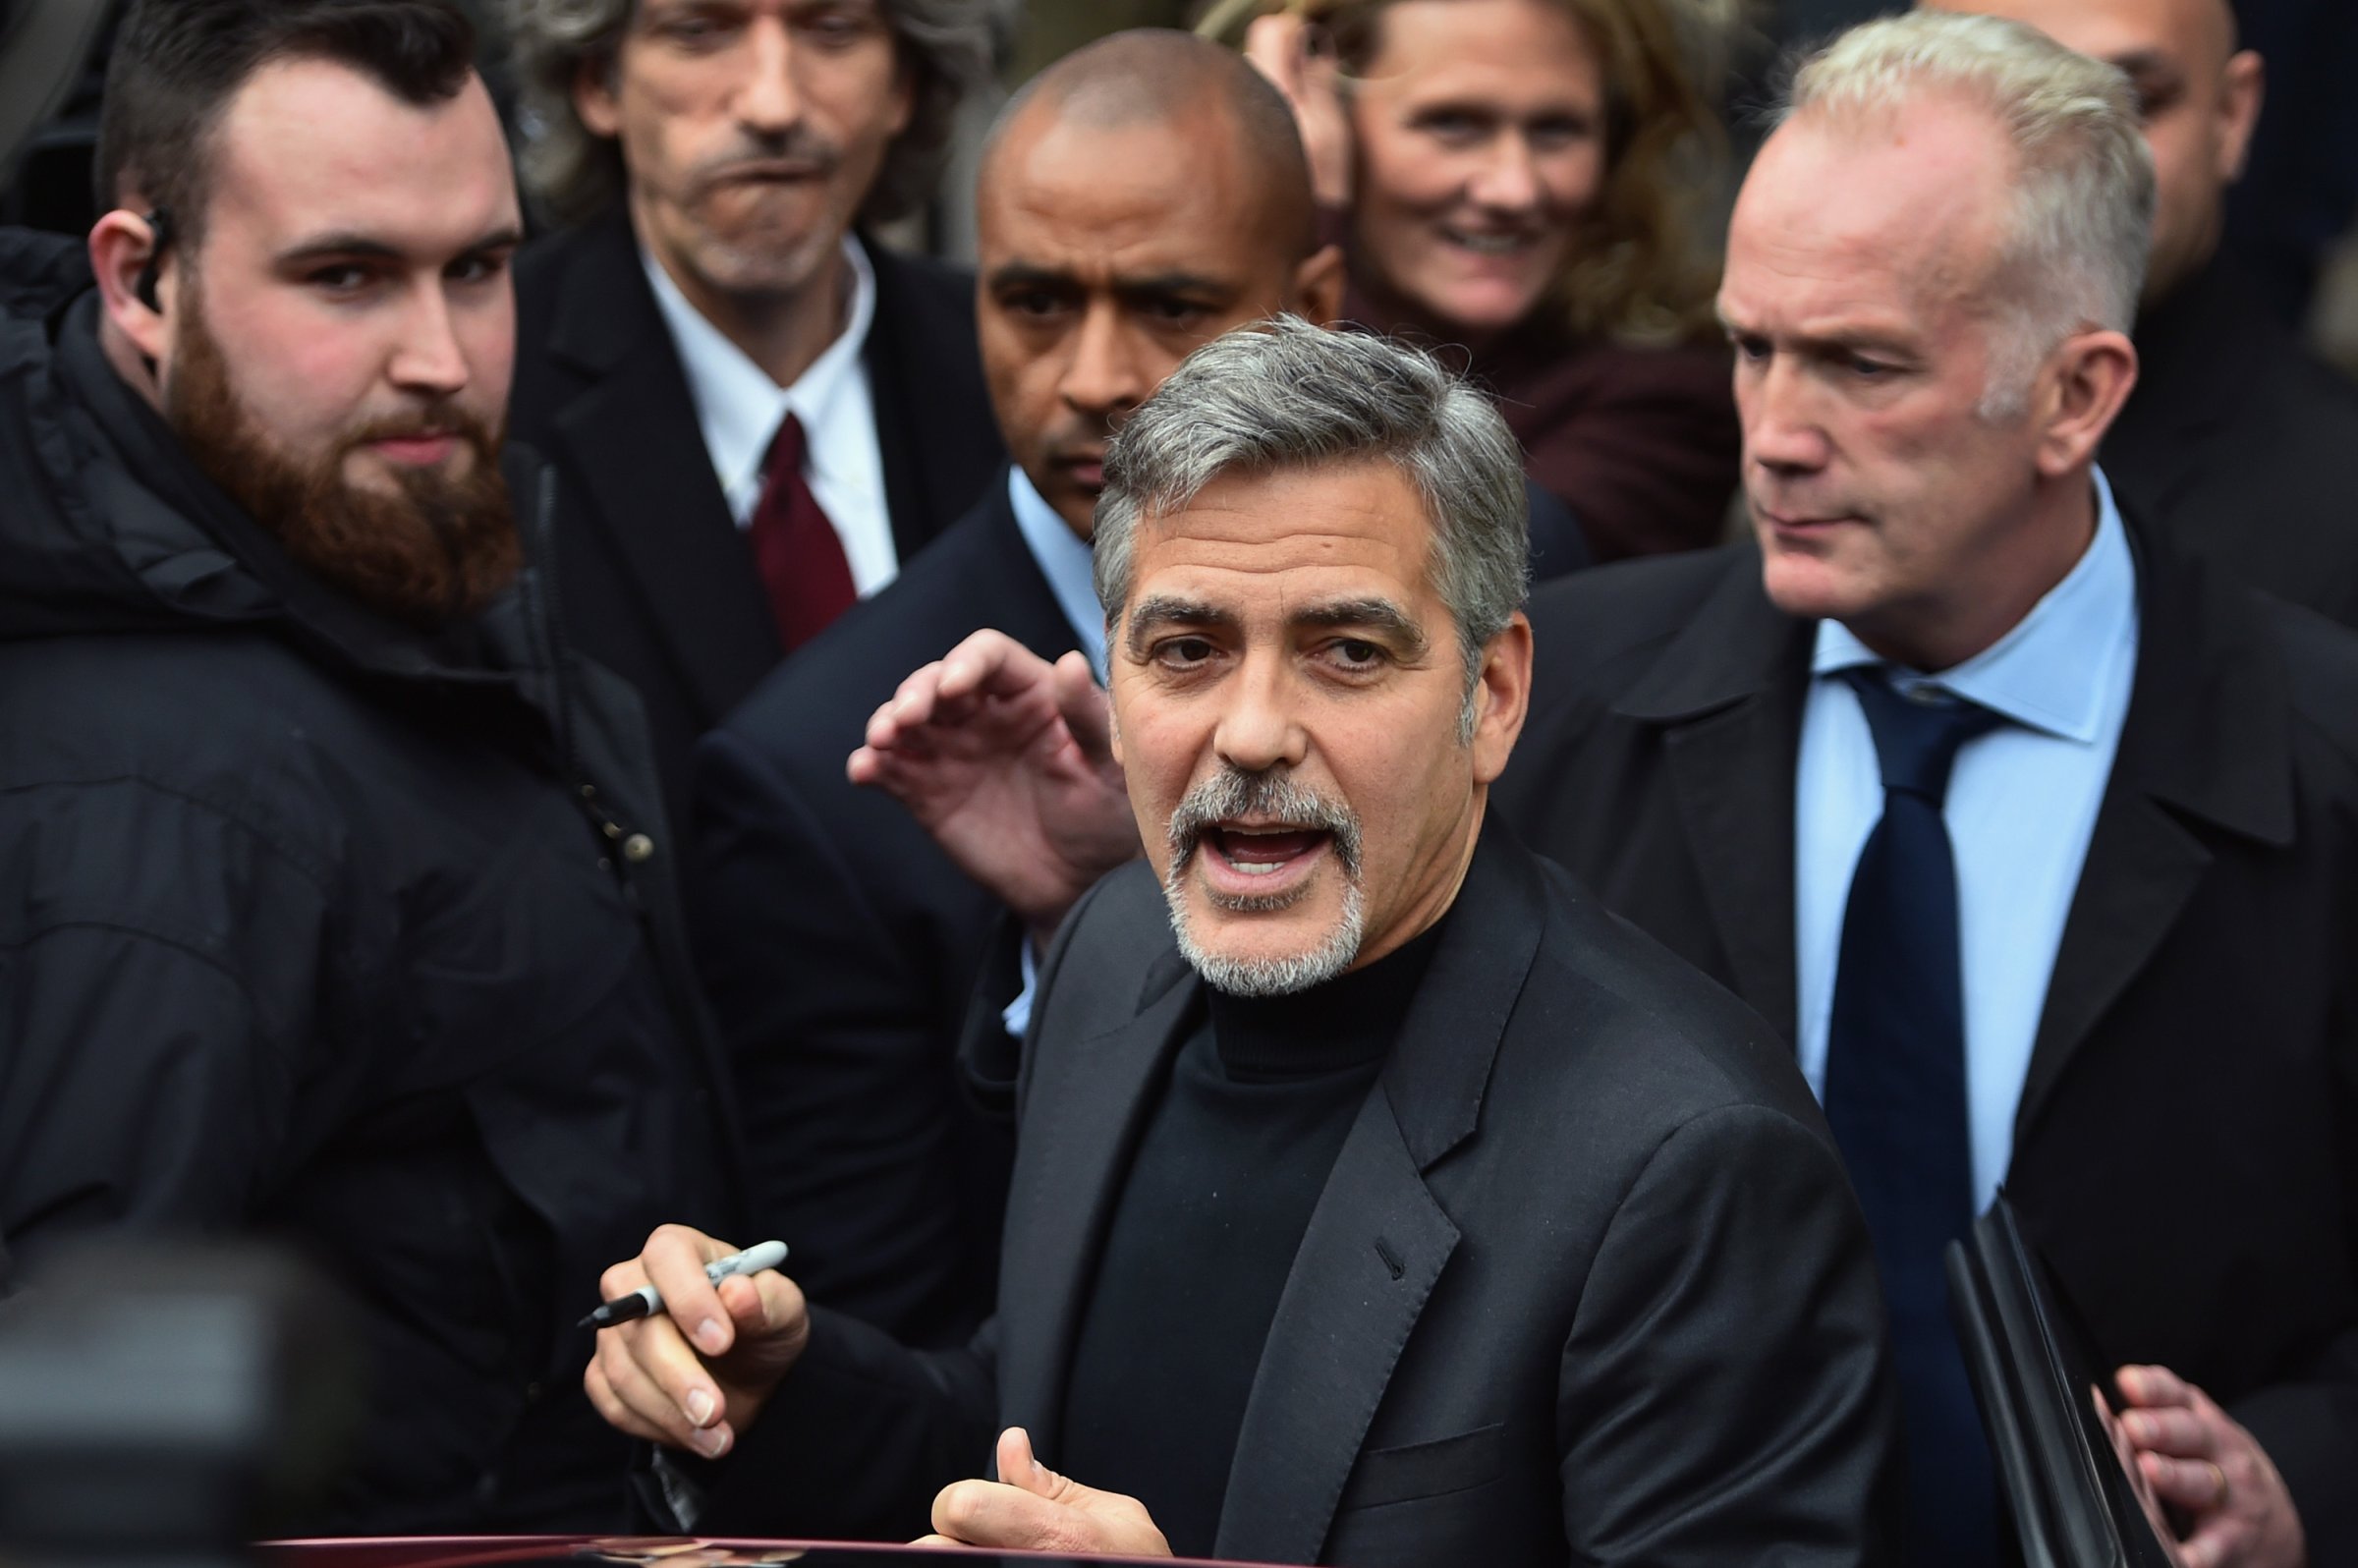 Hollywood actor George Clooney reacts with members of the public as he leaves Tiger Lily restaurant on Nov. 12, 2015 in Edinburgh, Scotland.